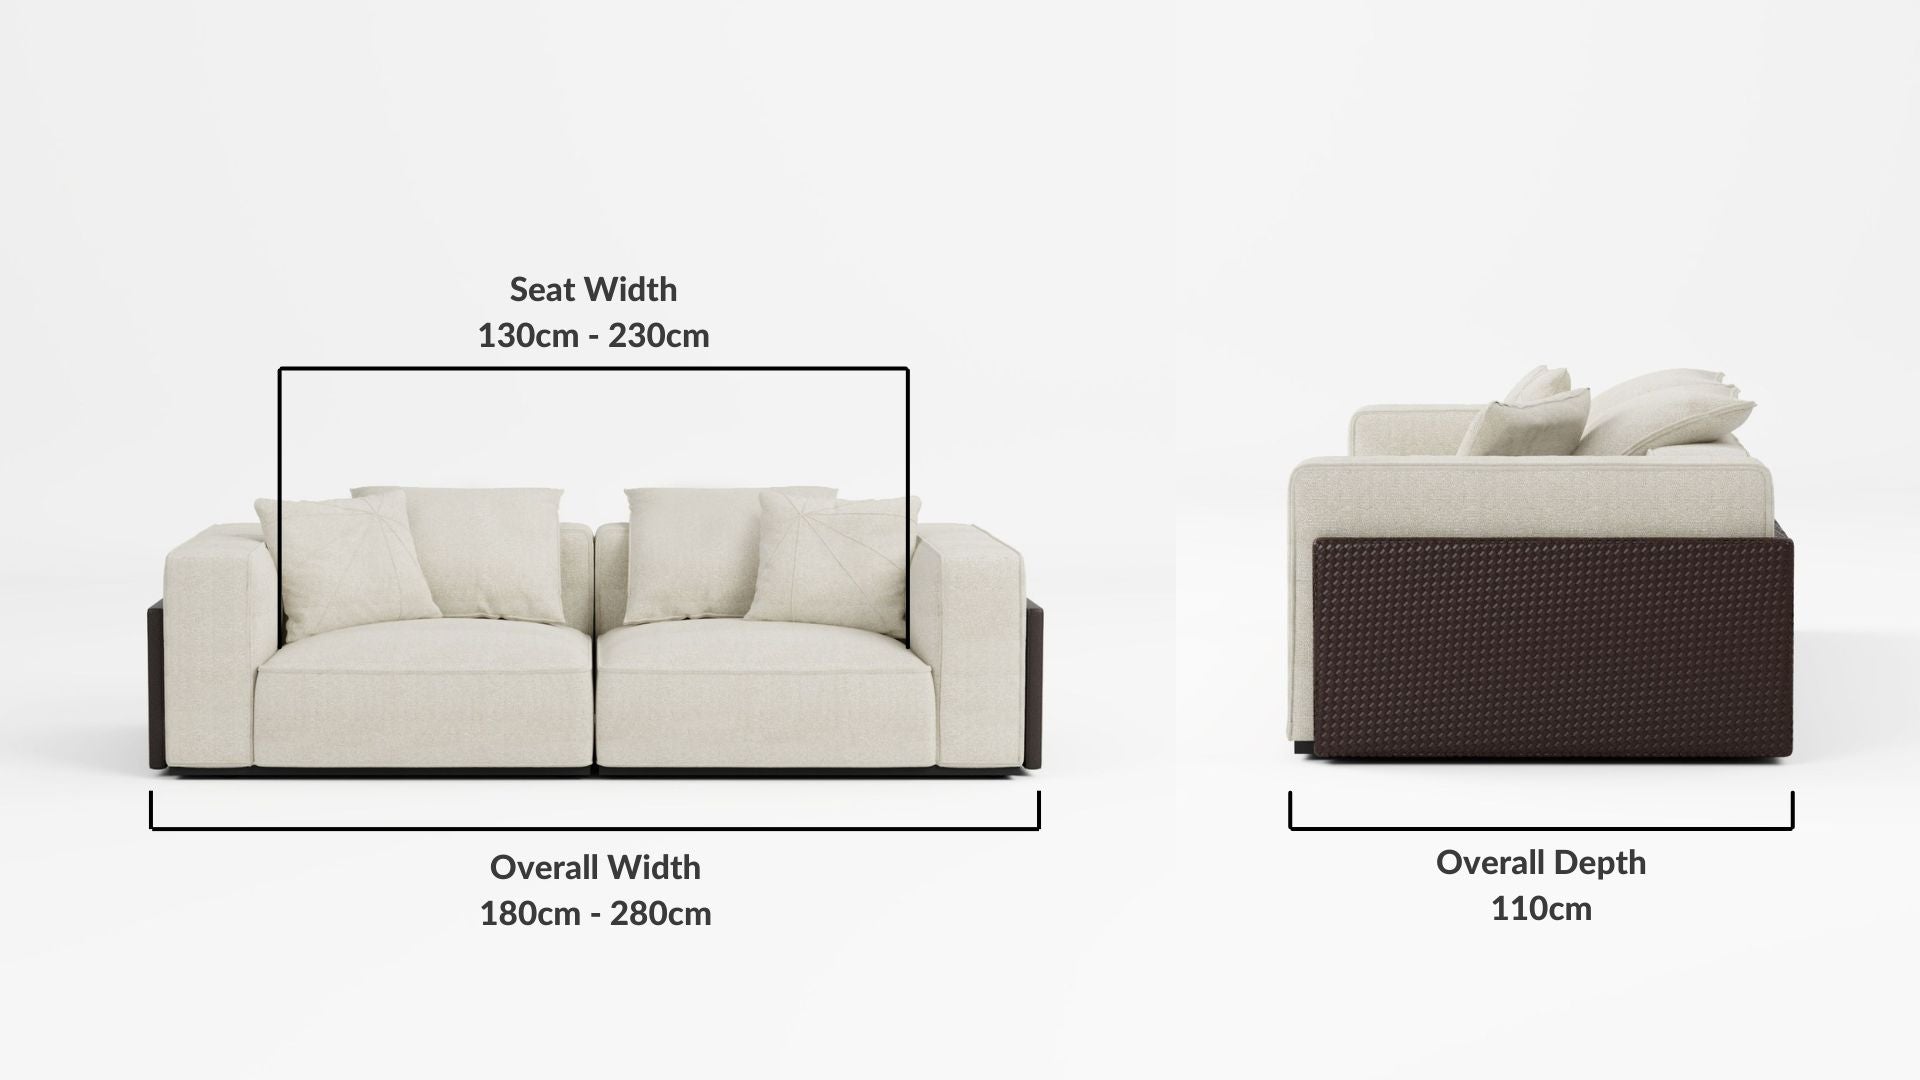 Details the key dimensions in terms of overall width, overall depth and seat width for Carson Fabric Sofa